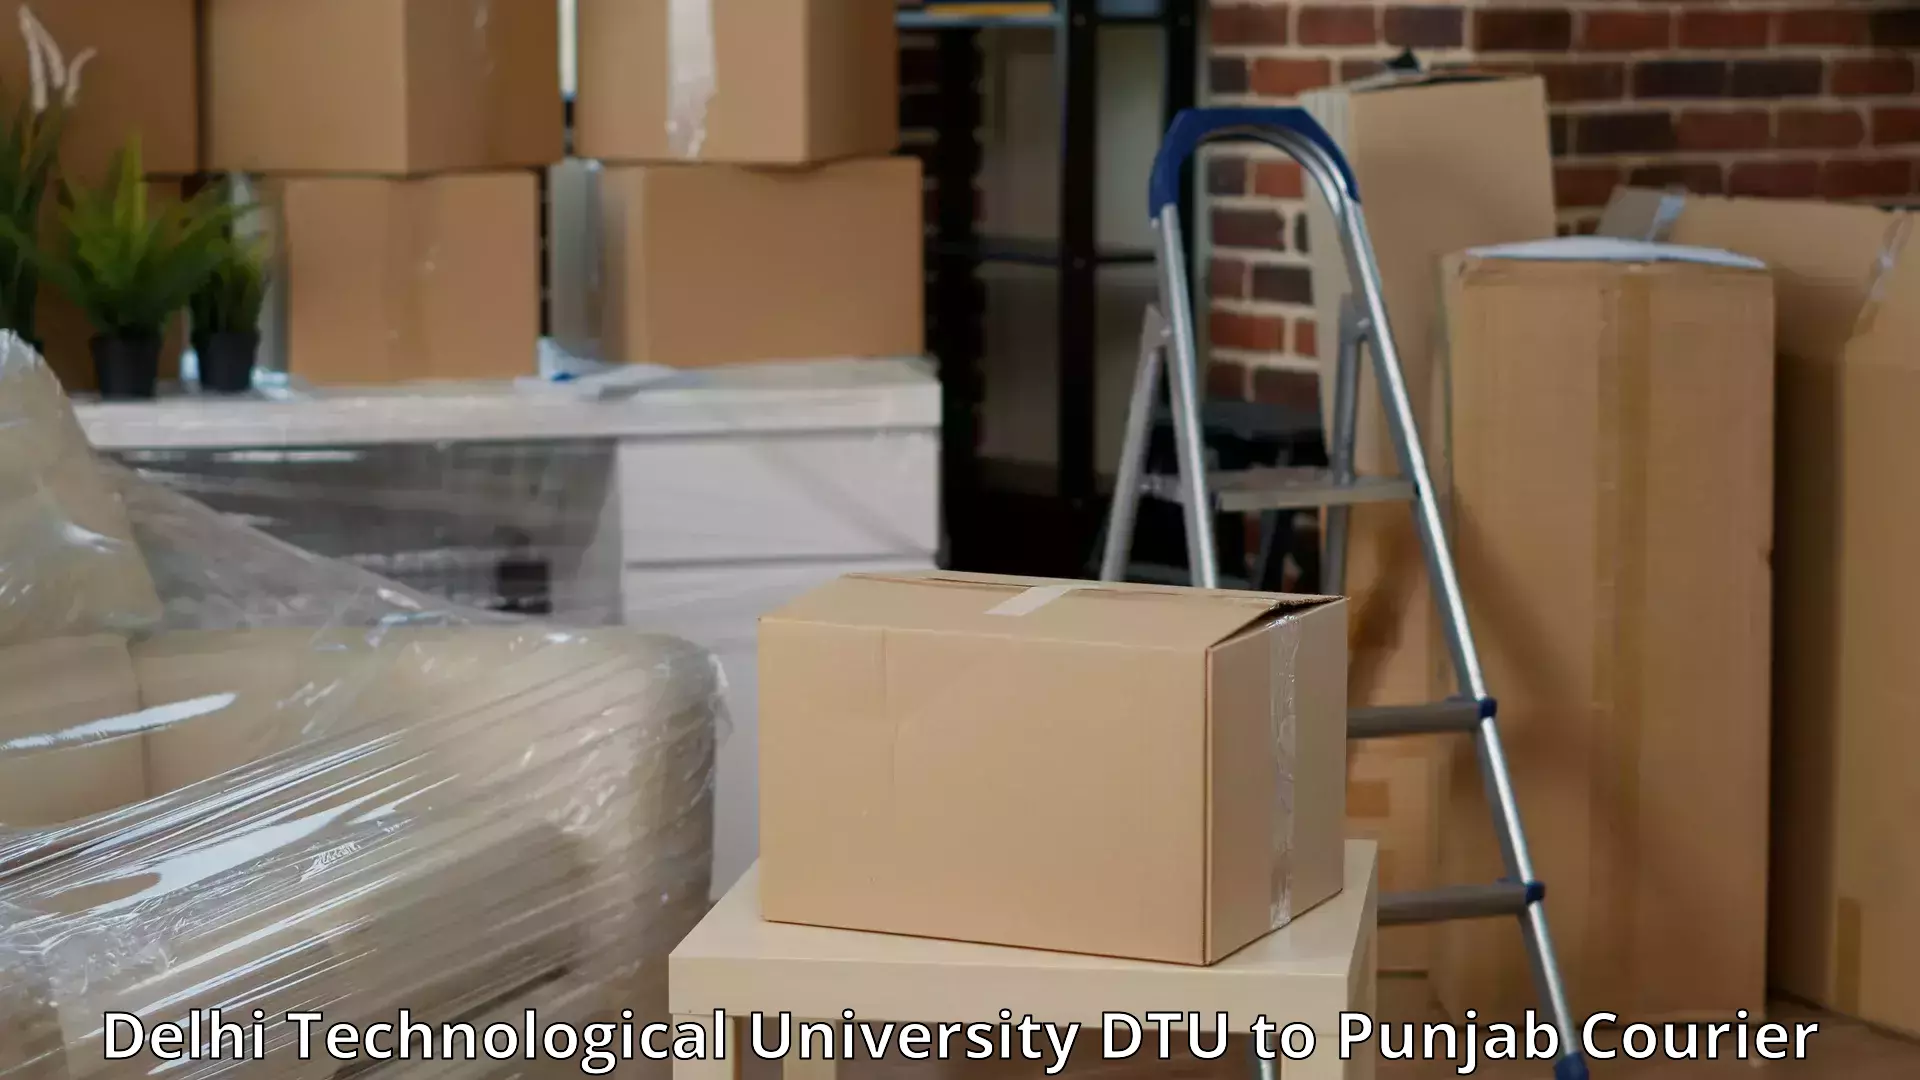 Hassle-free relocation Delhi Technological University DTU to Mohali